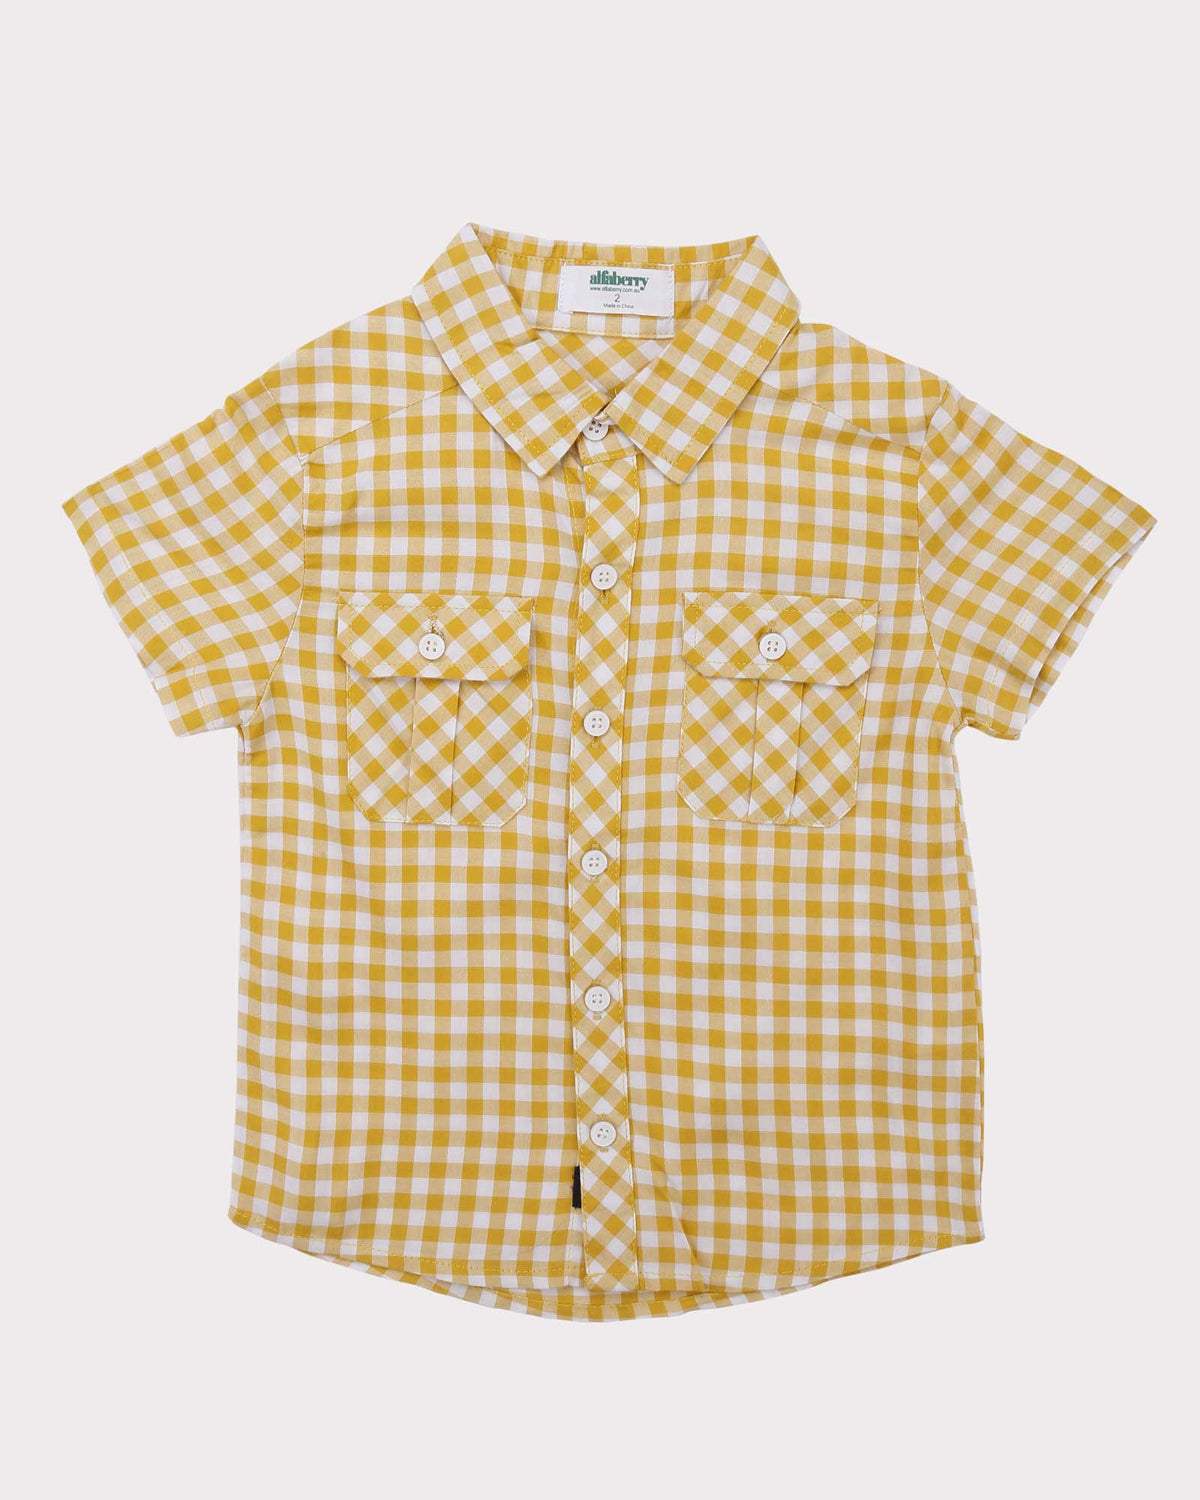 Gingham Shirt in Yellow front